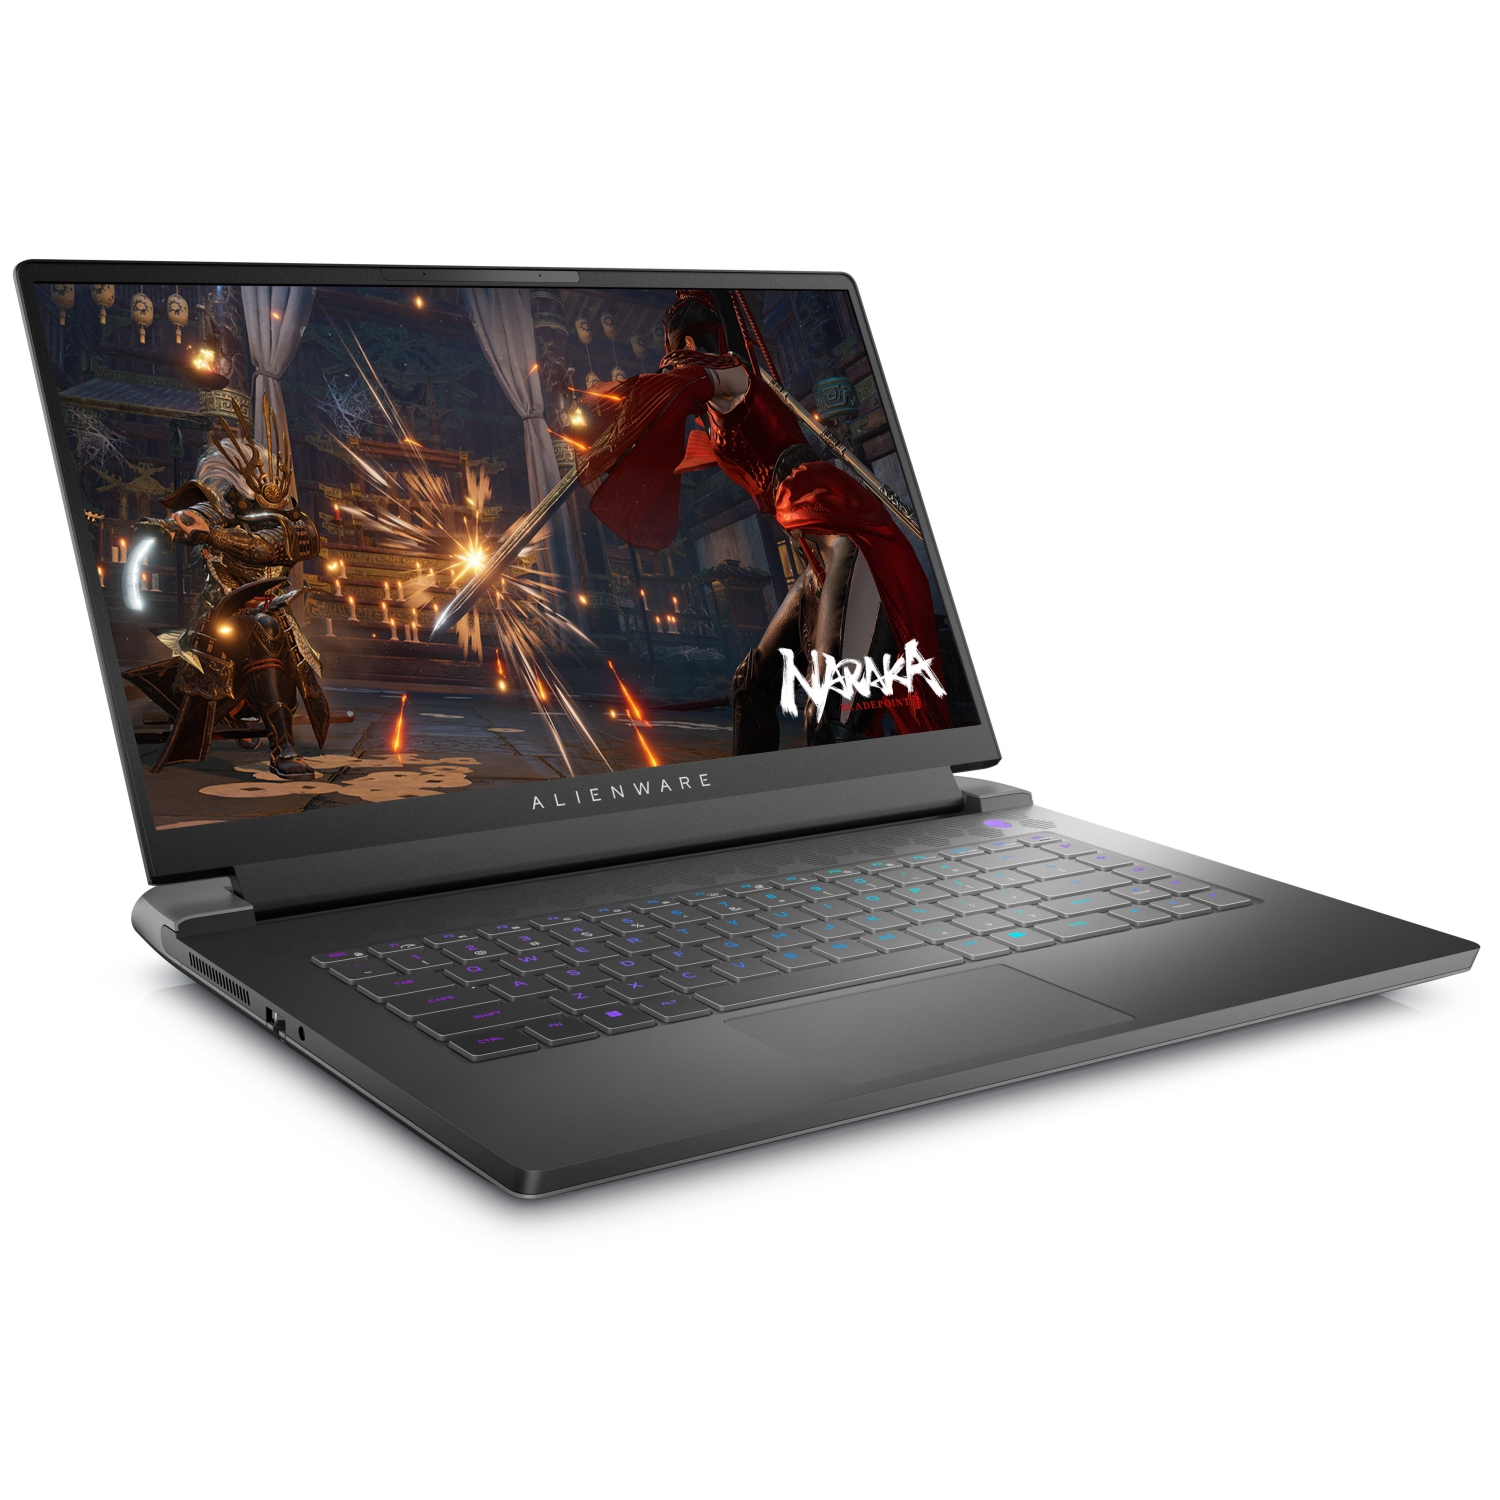 Refurbished (Excellent) – Dell Alienware m15 R7 Gaming Laptop (2022) | 15.6" QHD | Core i9 - 1TB SSD - 32GB RAM - RTX 3080 | 14 Cores @ 5 GHz - 12th Gen CPU - 8GB GDDR6X